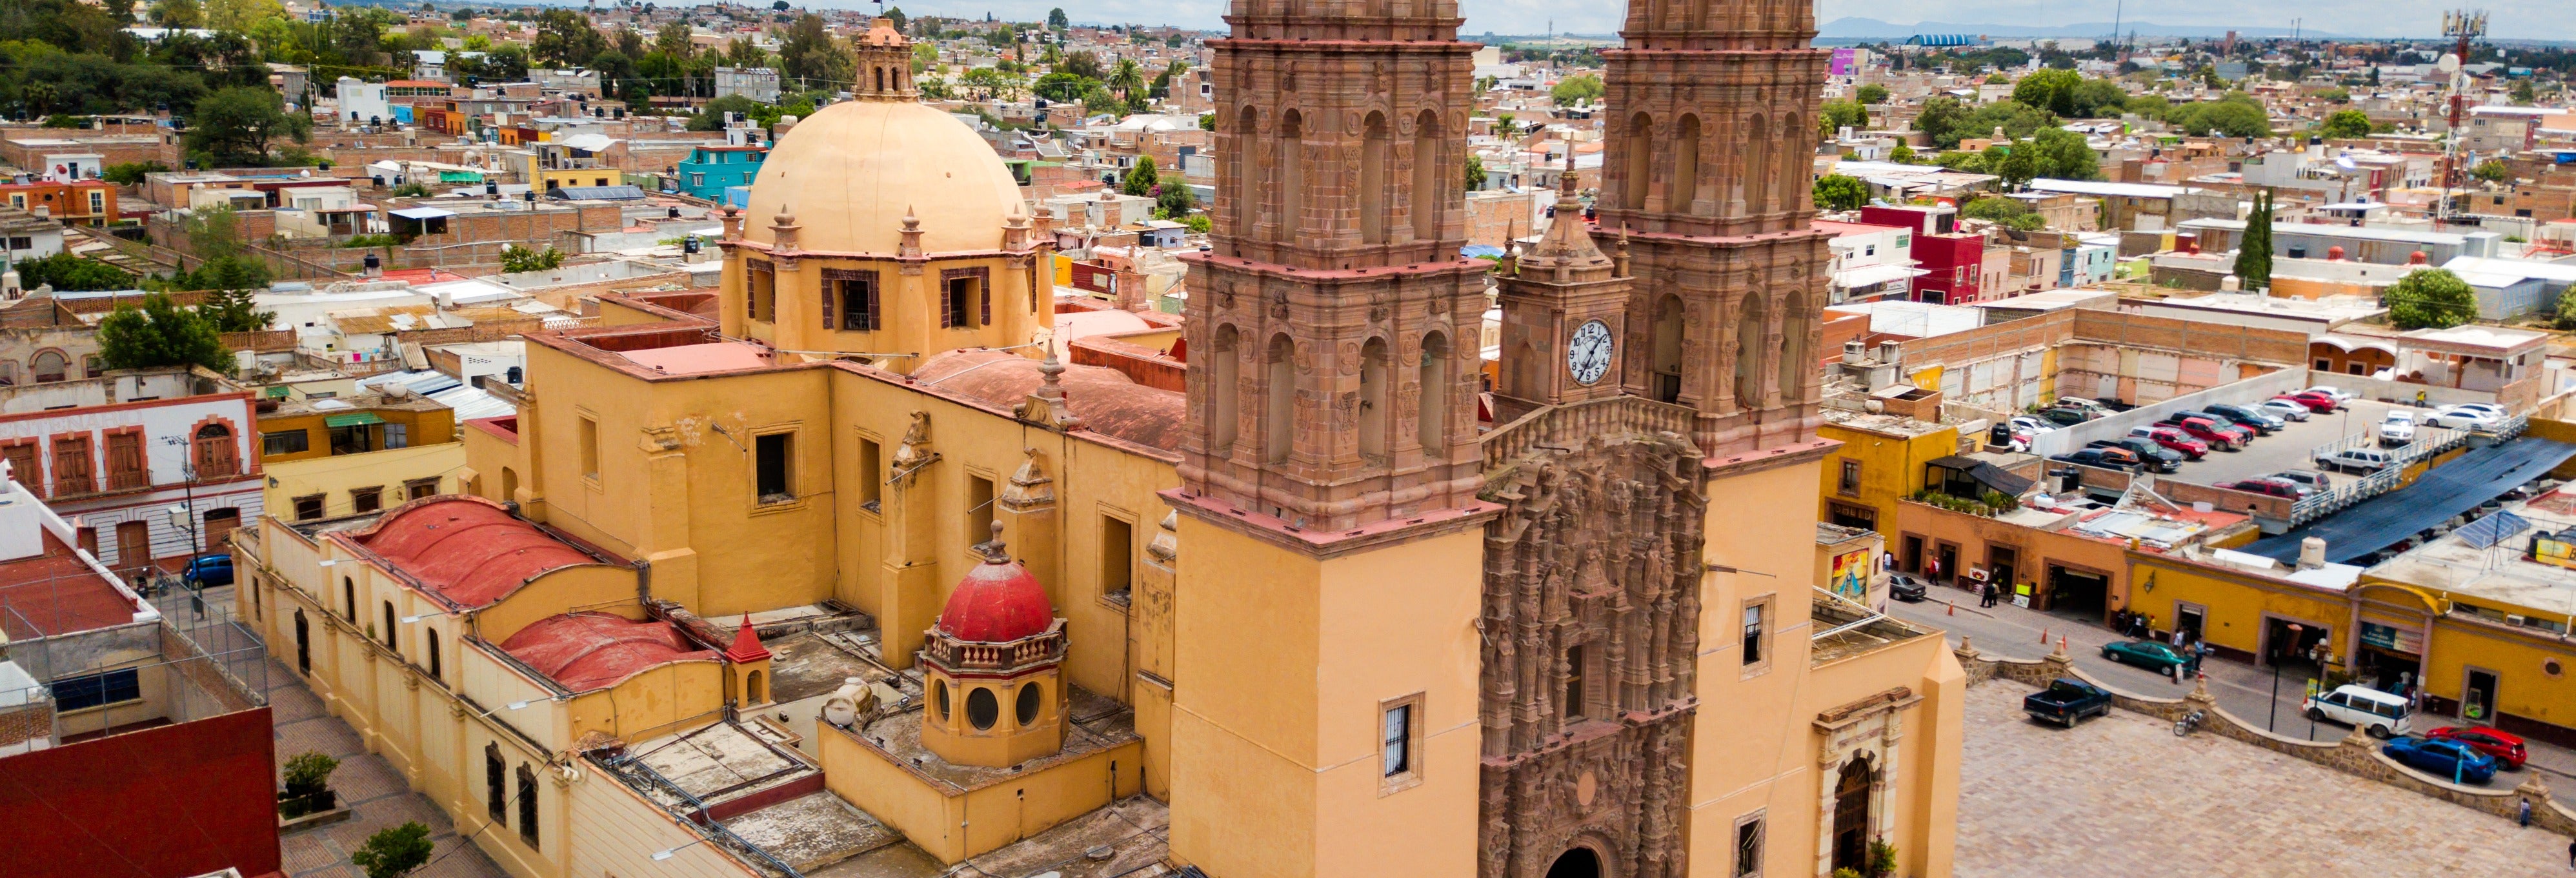 Mexican Independence Tour of Guanajuato